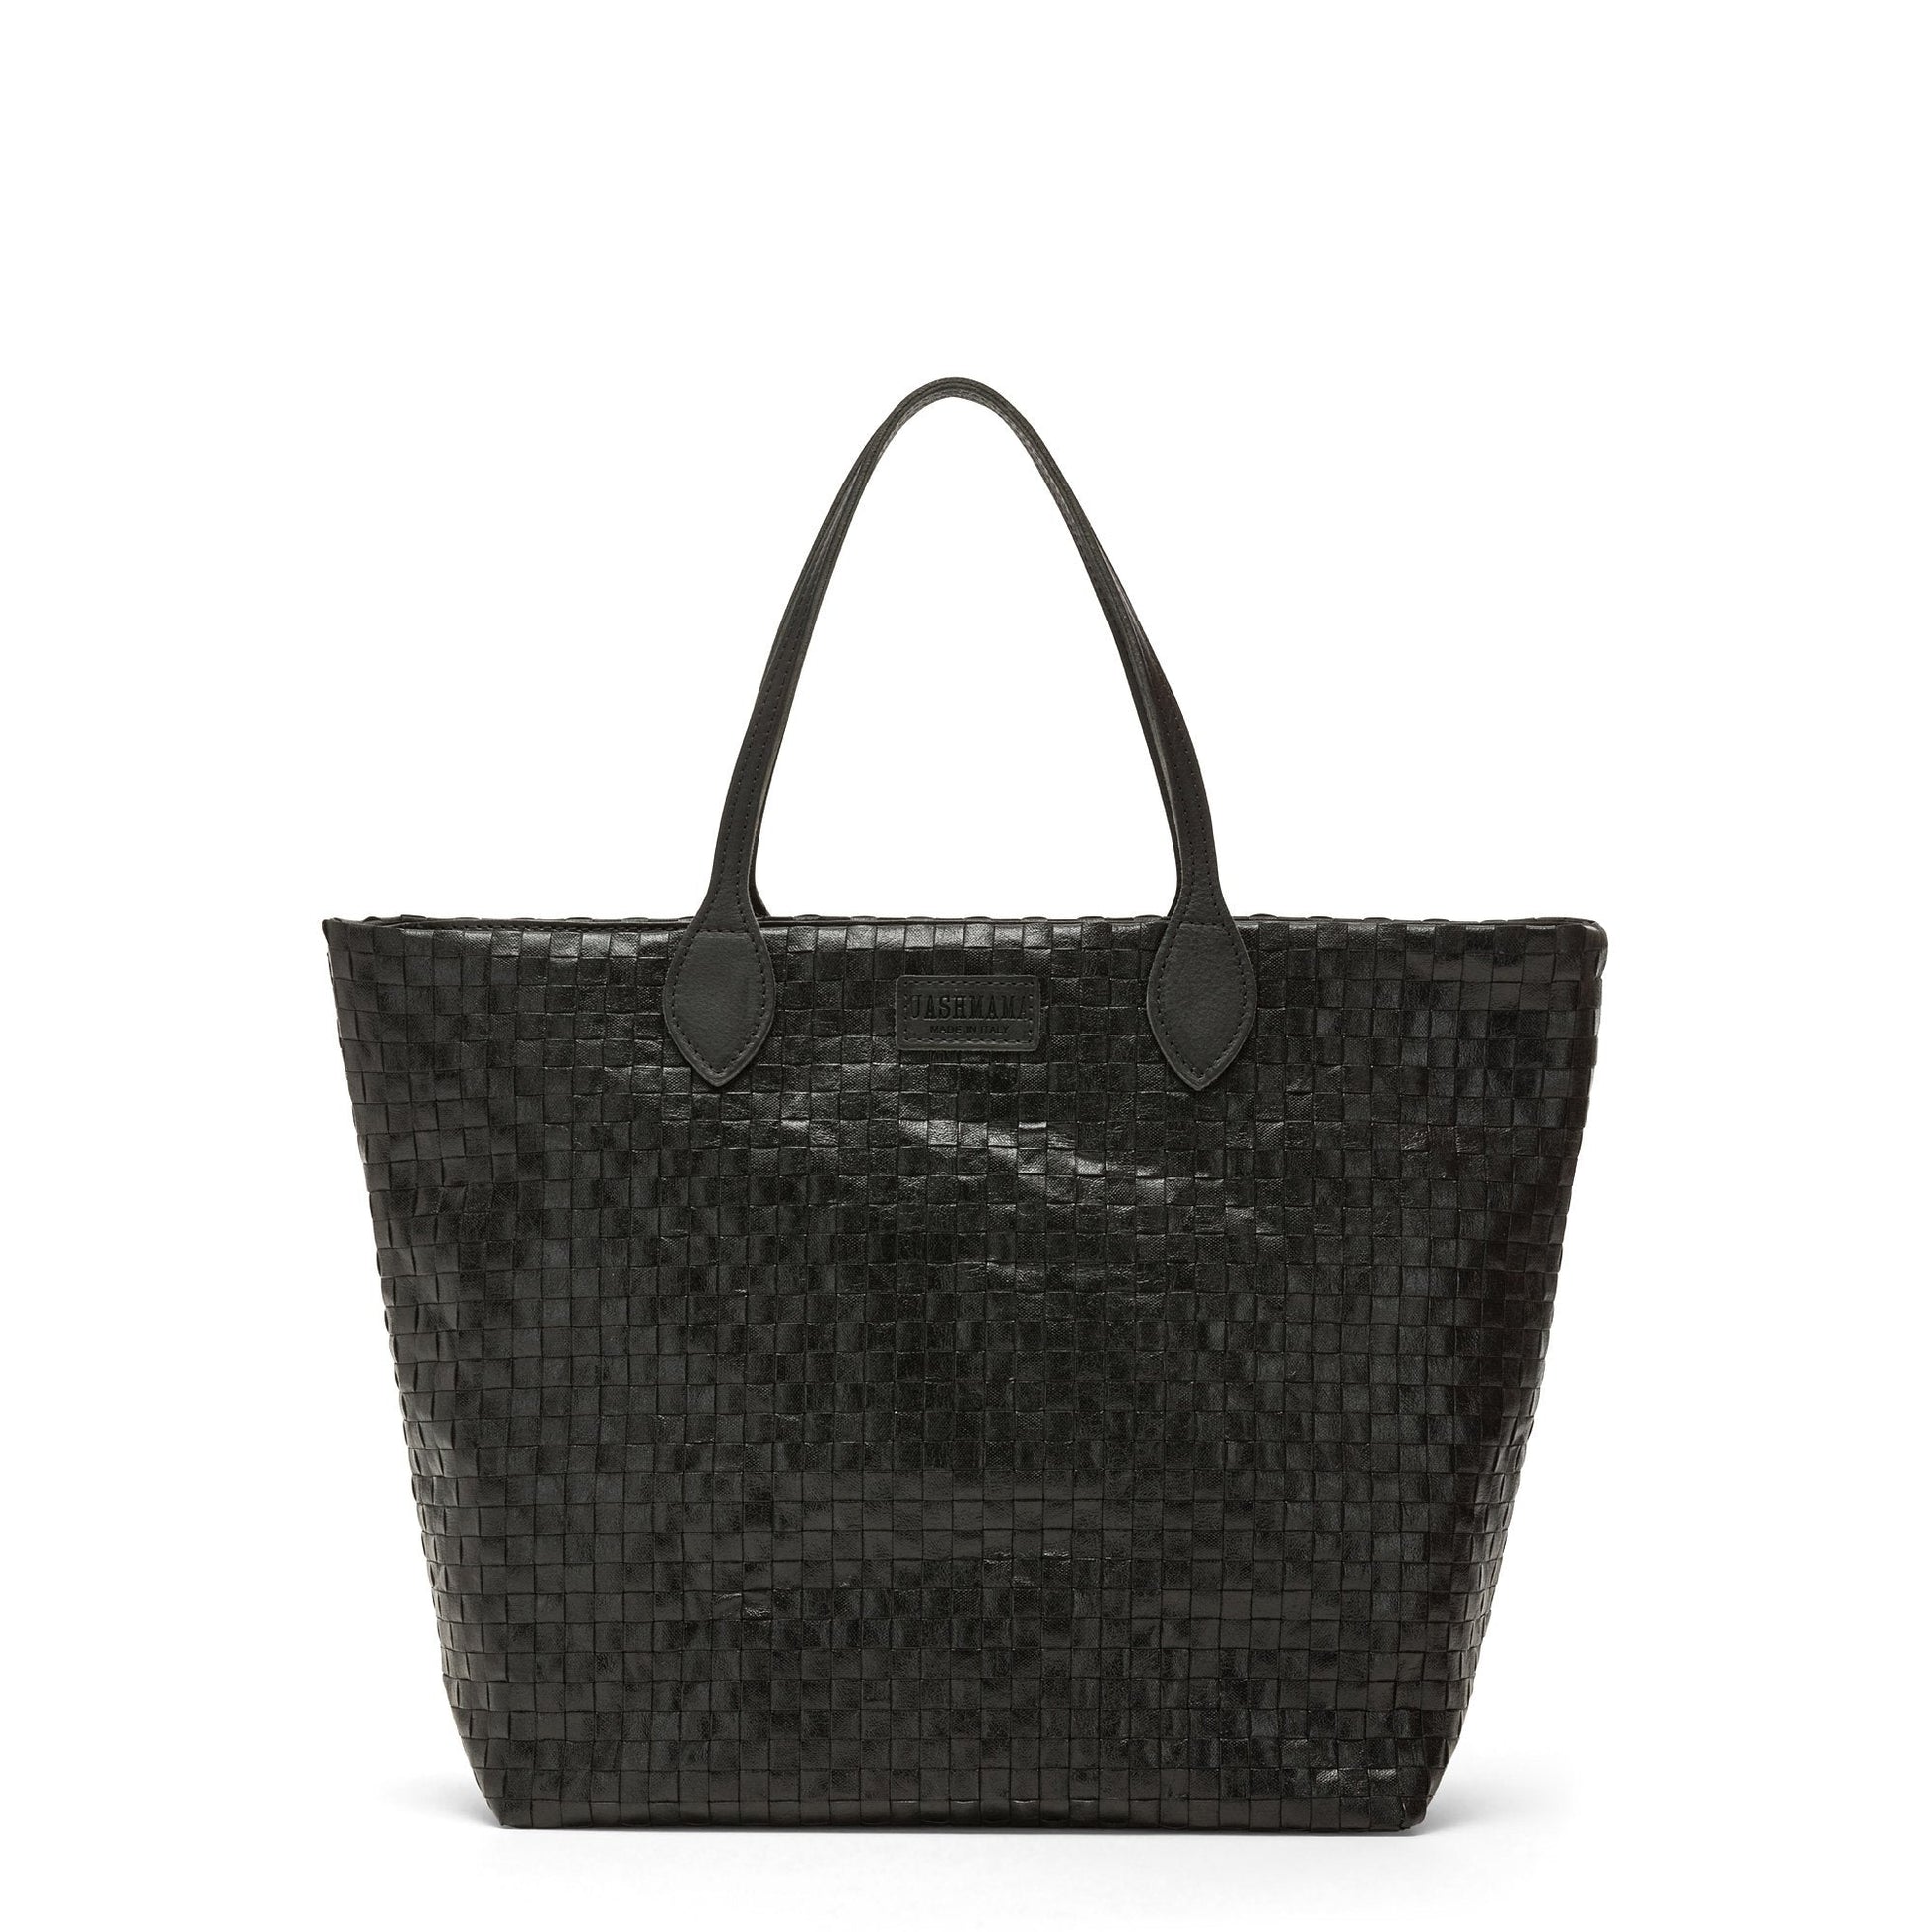 A large washable paper woven tote is shown. It has two long leather handles and a leather UASHMAMA logo label on the outside in between the handles. The bag shown is black.